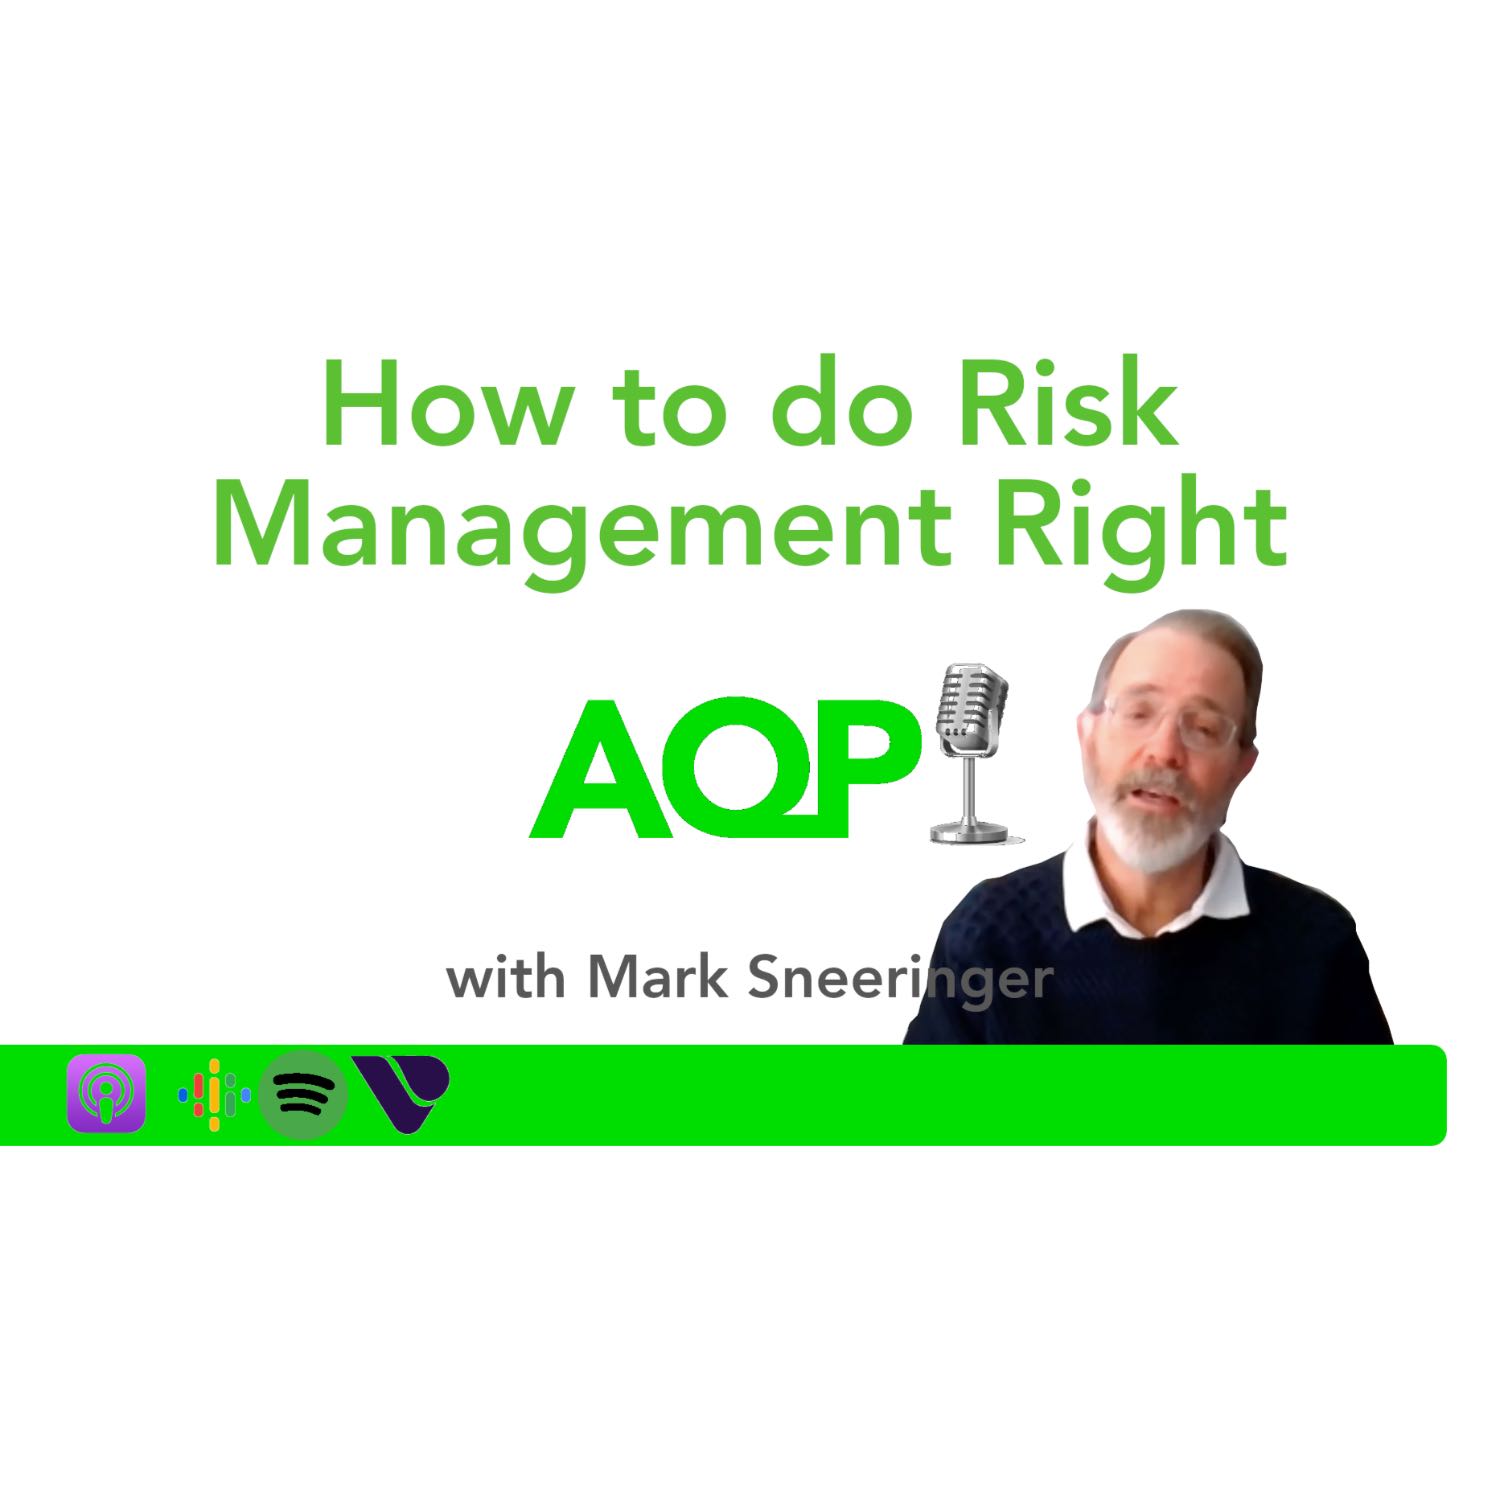 How to do Risk Management Right